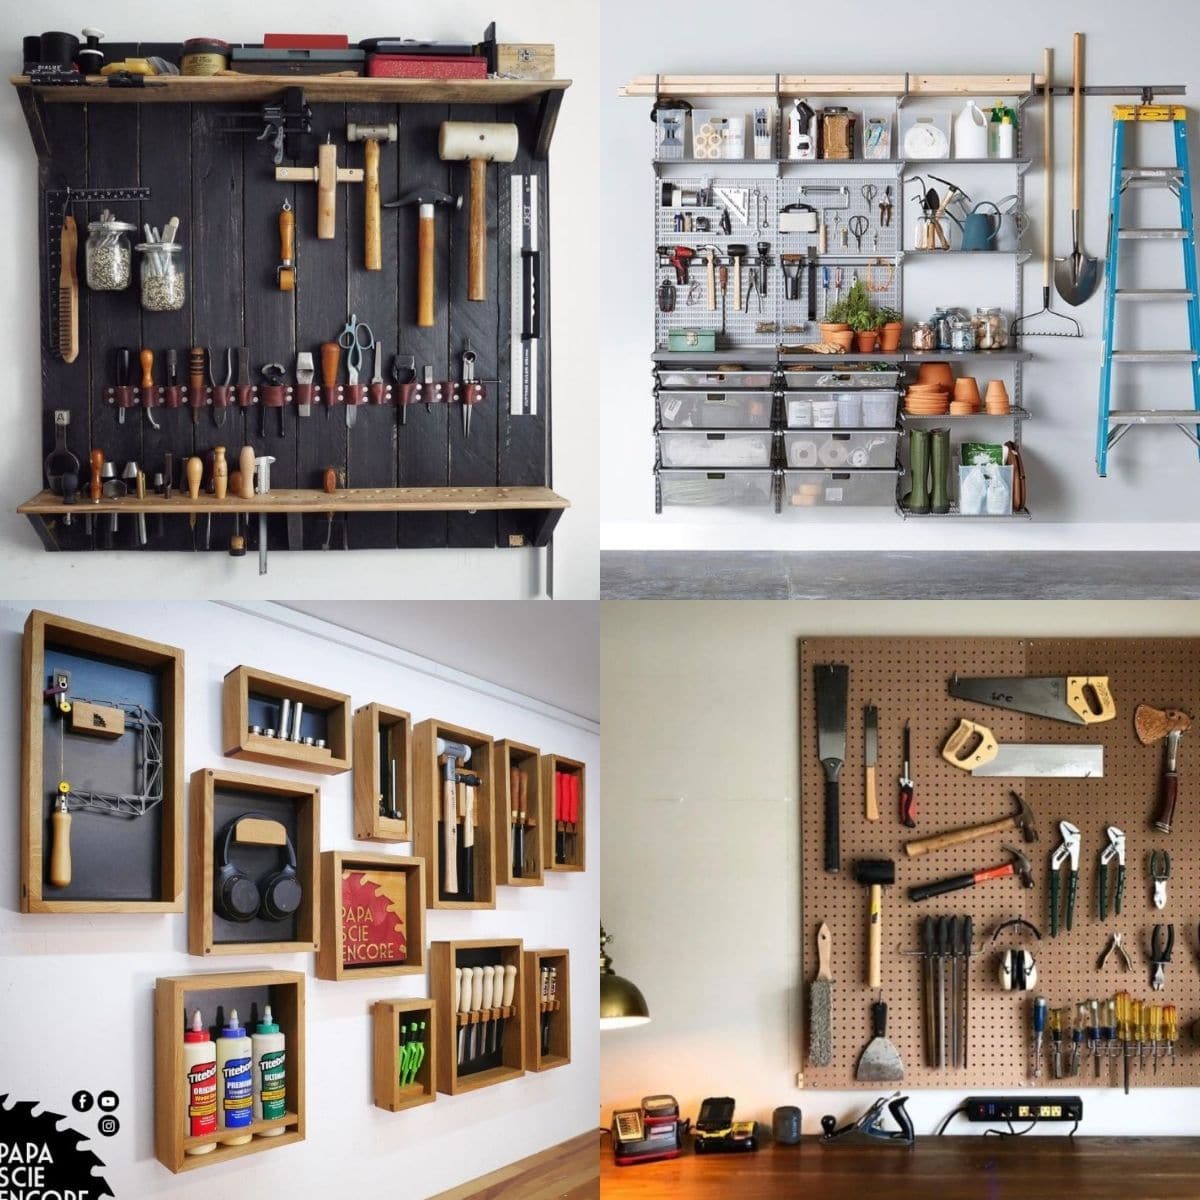 What are the Best Tool Storage Solutions for Small Spaces?